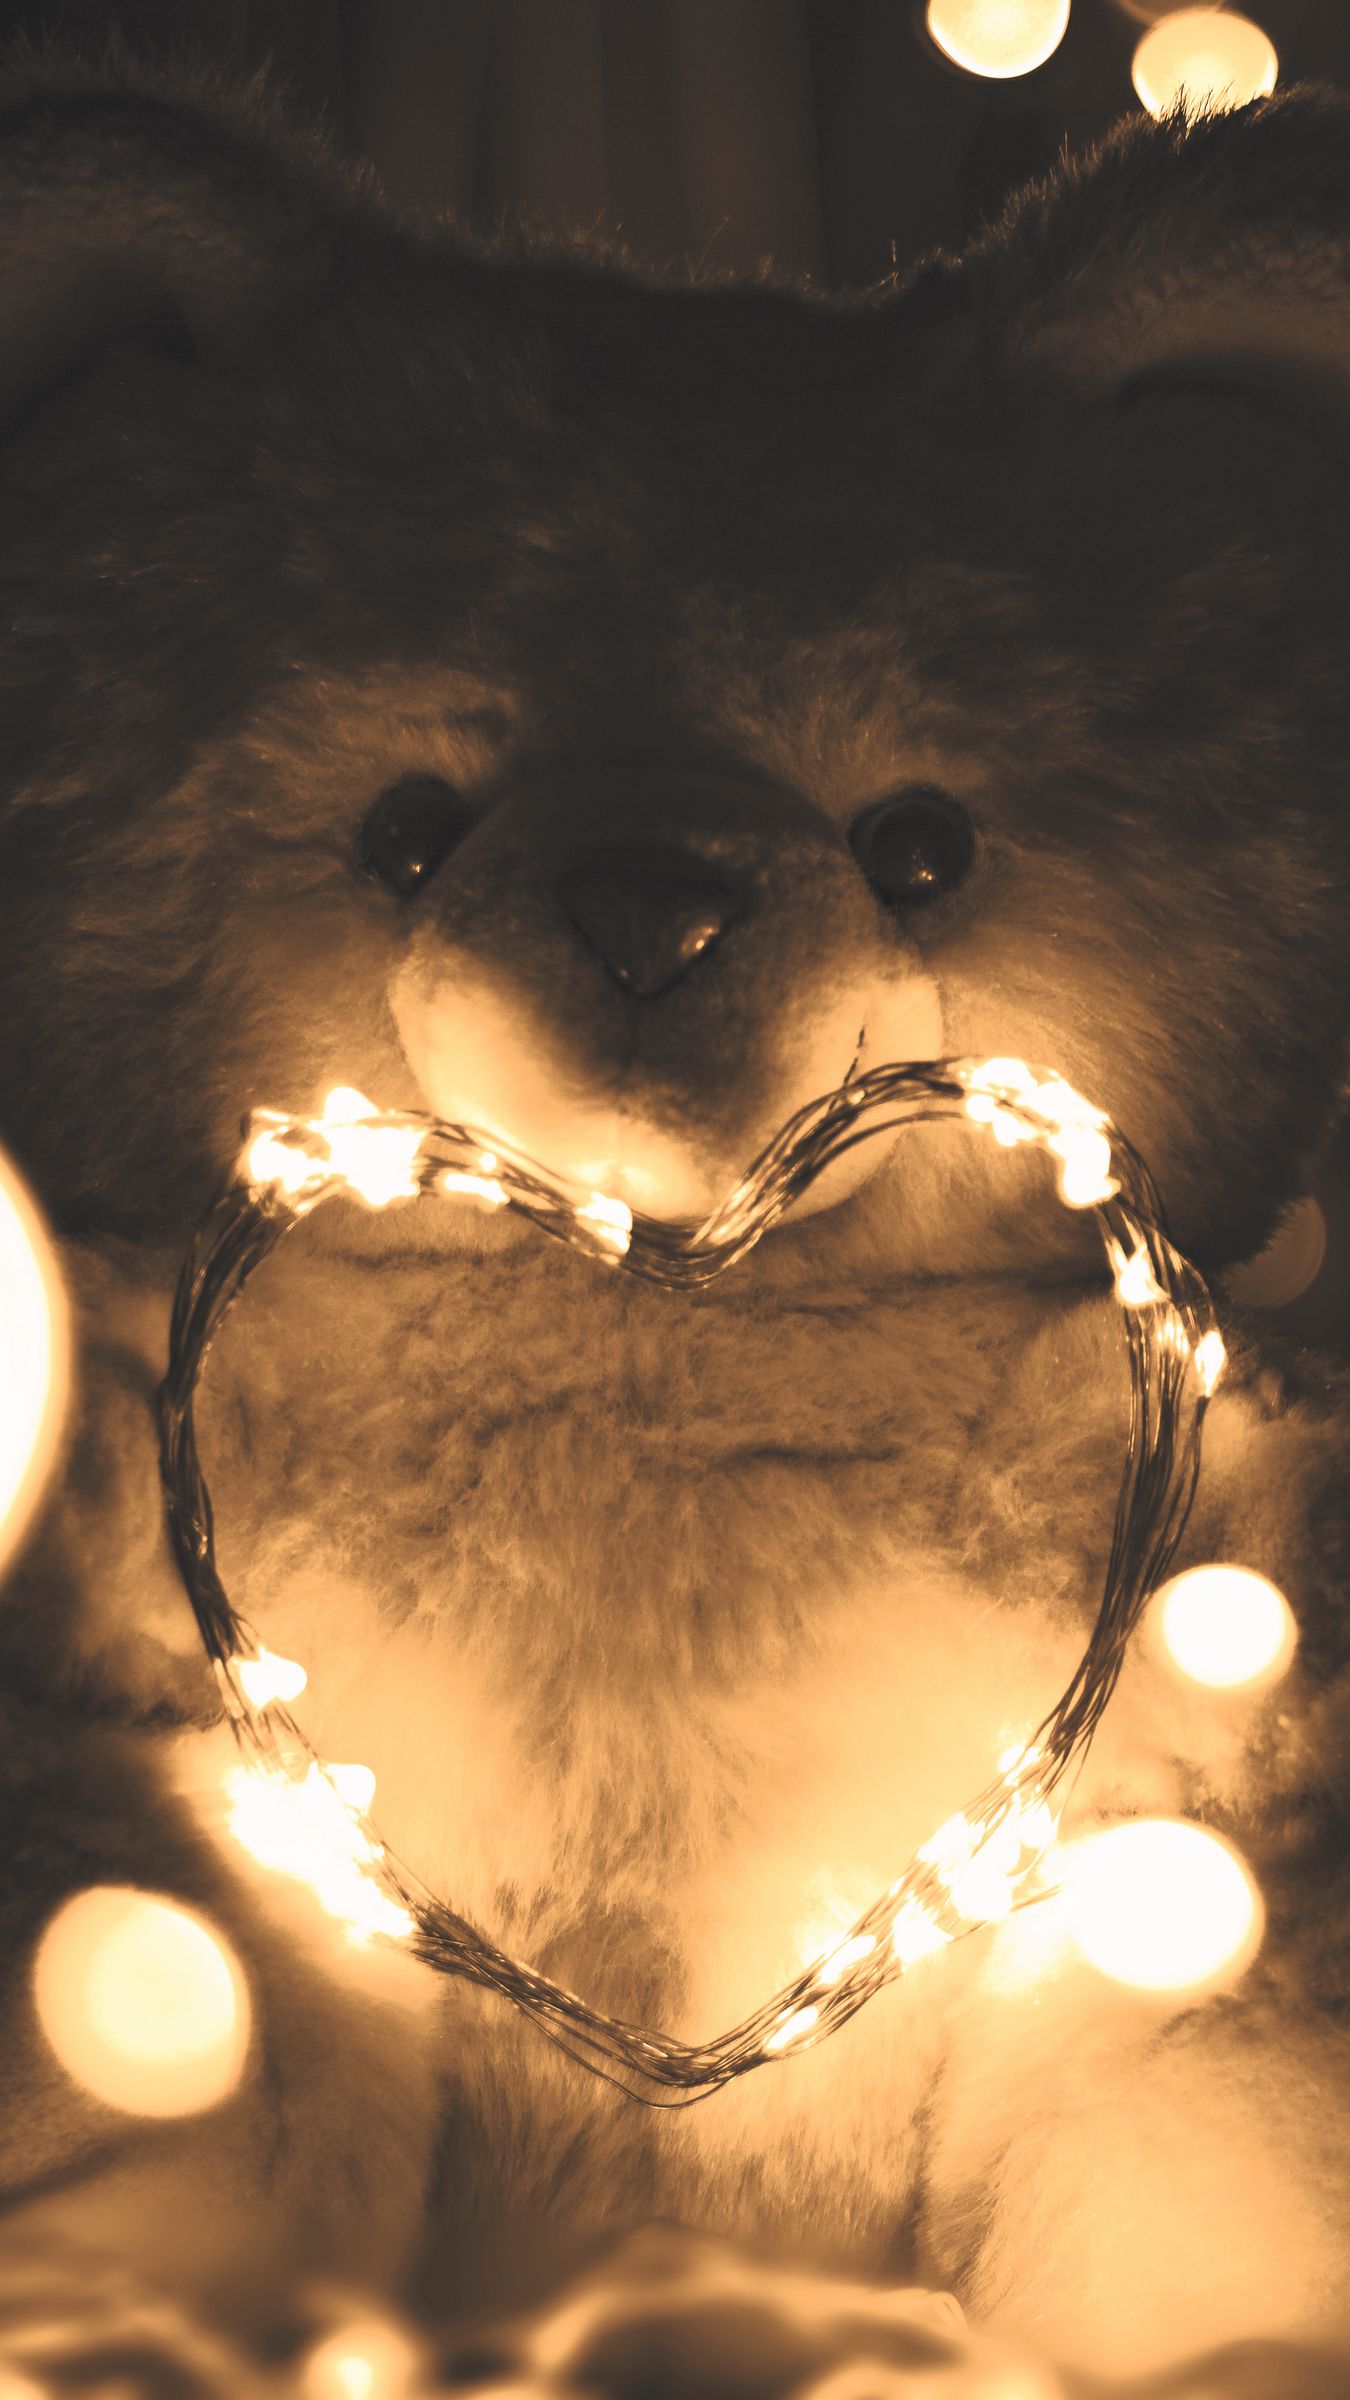 New Teddy Bear  teddy sitting by fire Wallpaper Download  MobCup